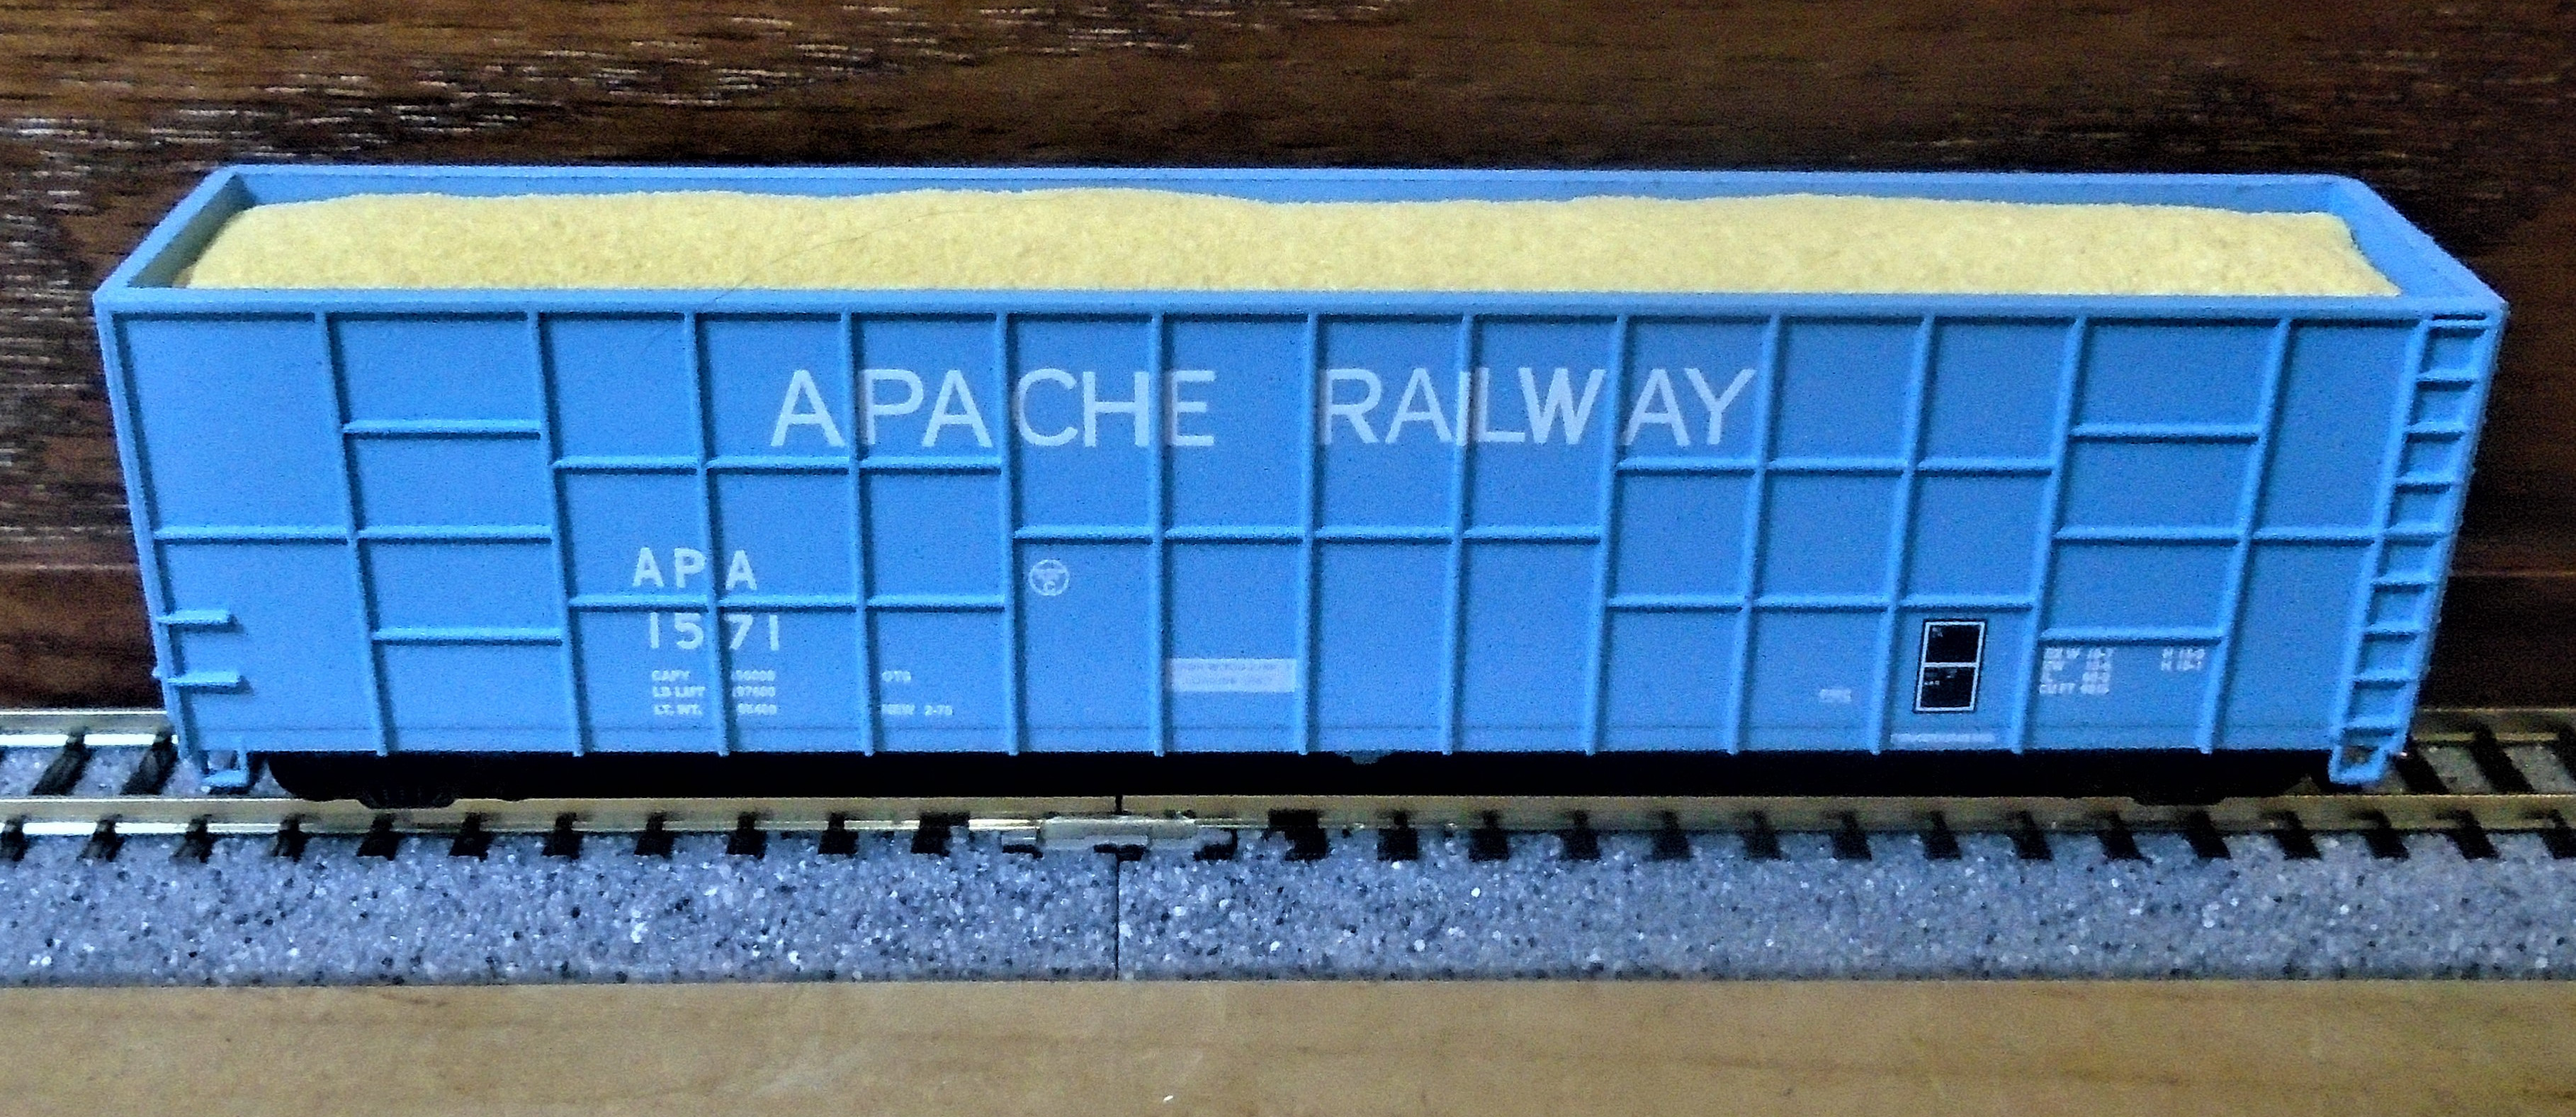 N Scale - Deluxe Innovations - 160603-C - Gondola, Woodchip - Apache - 1571